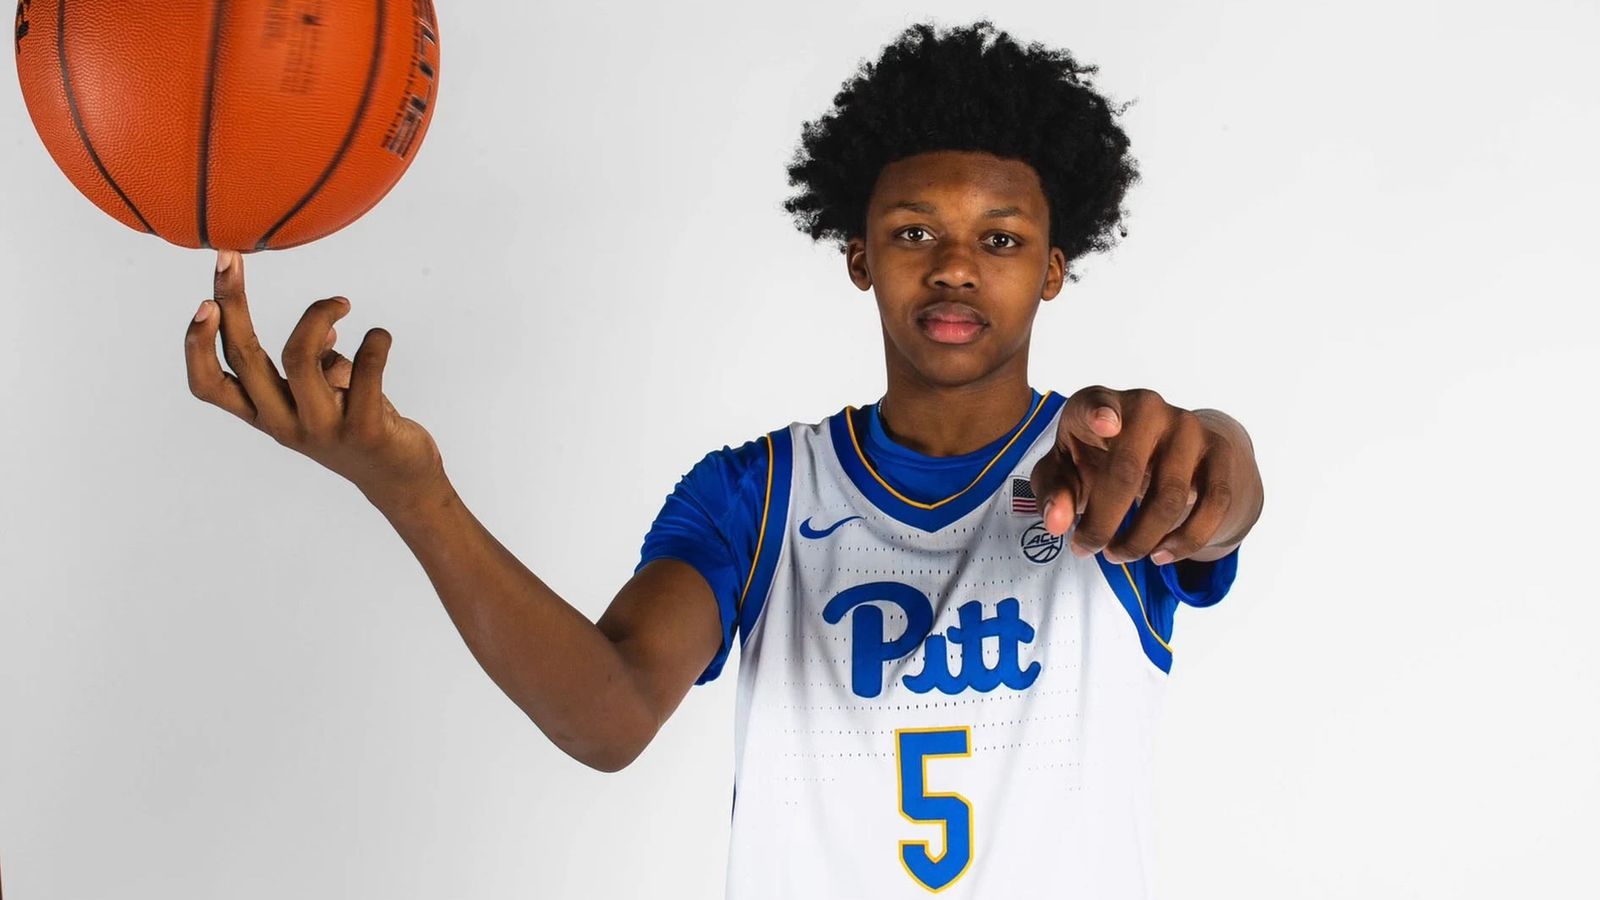 Pitt's Jeff Capel adds Carlton Carrington, another Top 100 Commitment